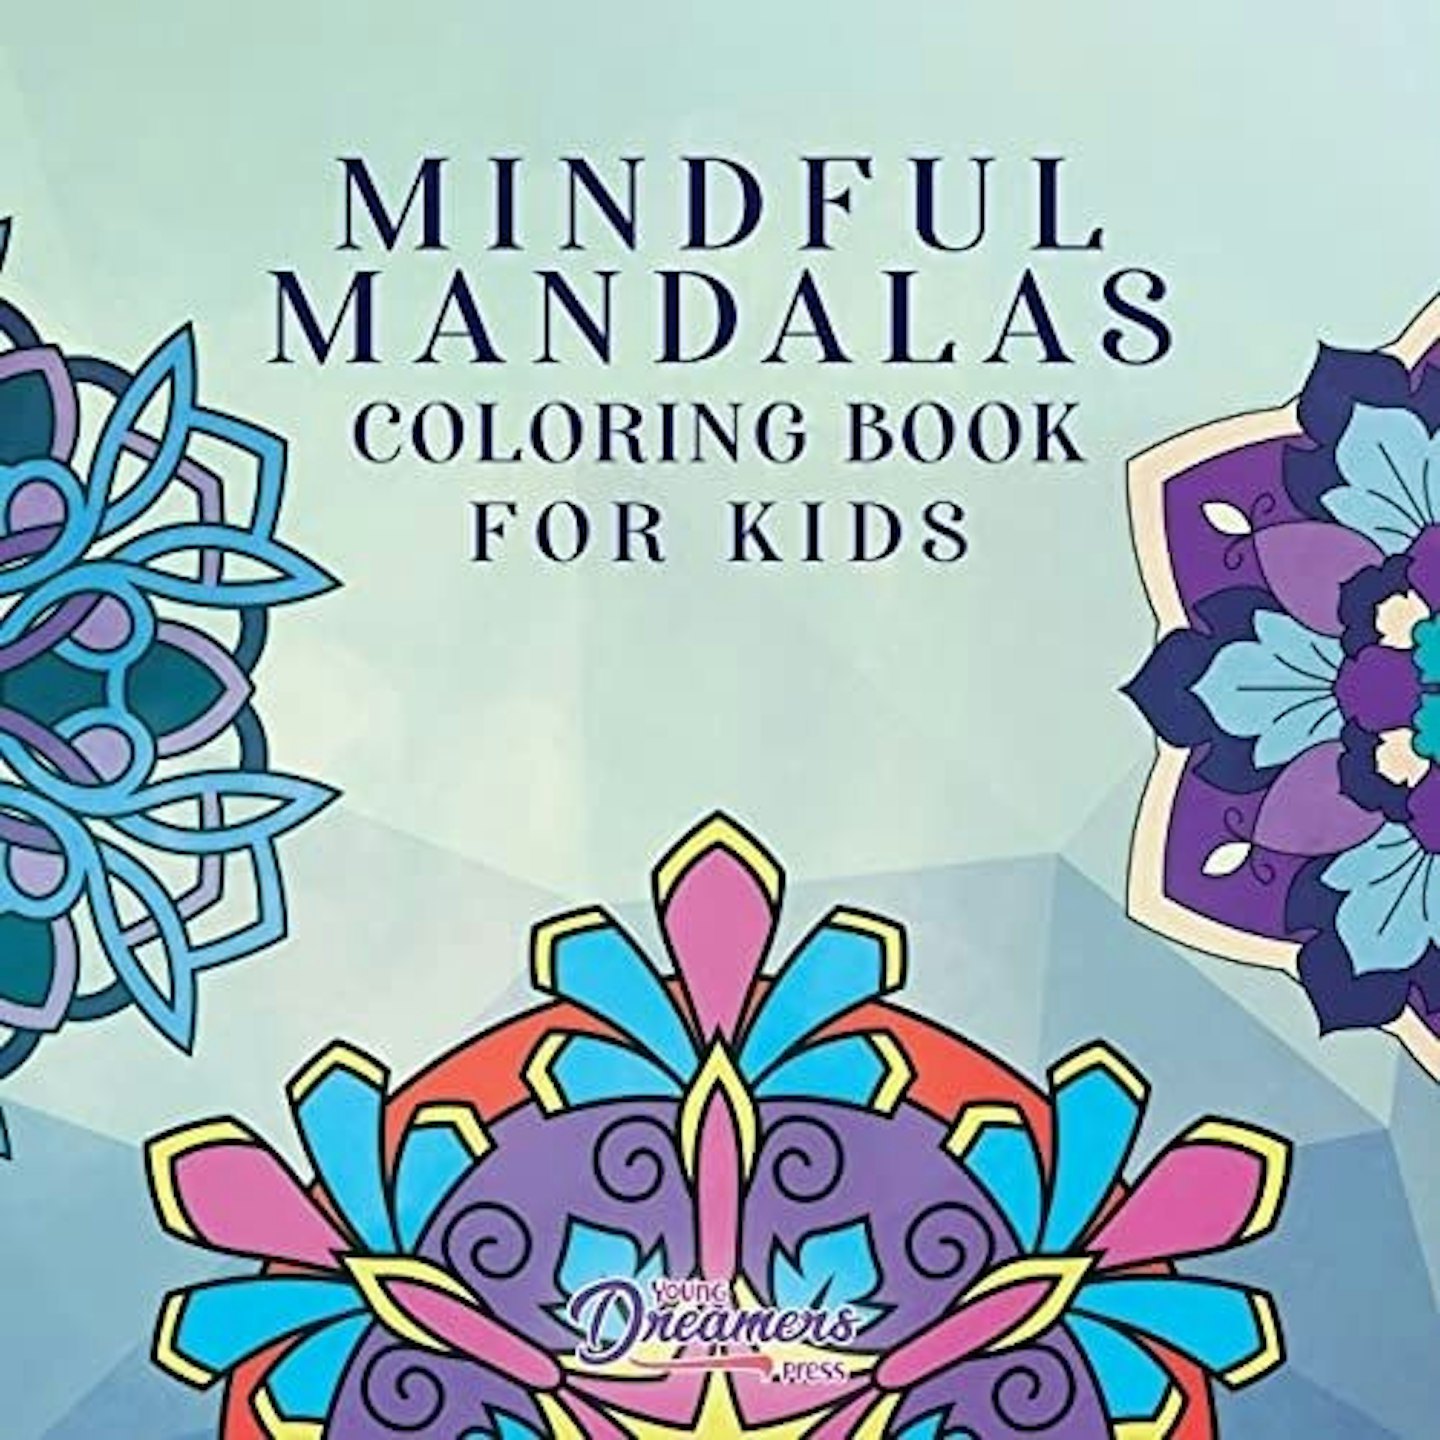 Mindful Mandalas Colouring Book for Kids